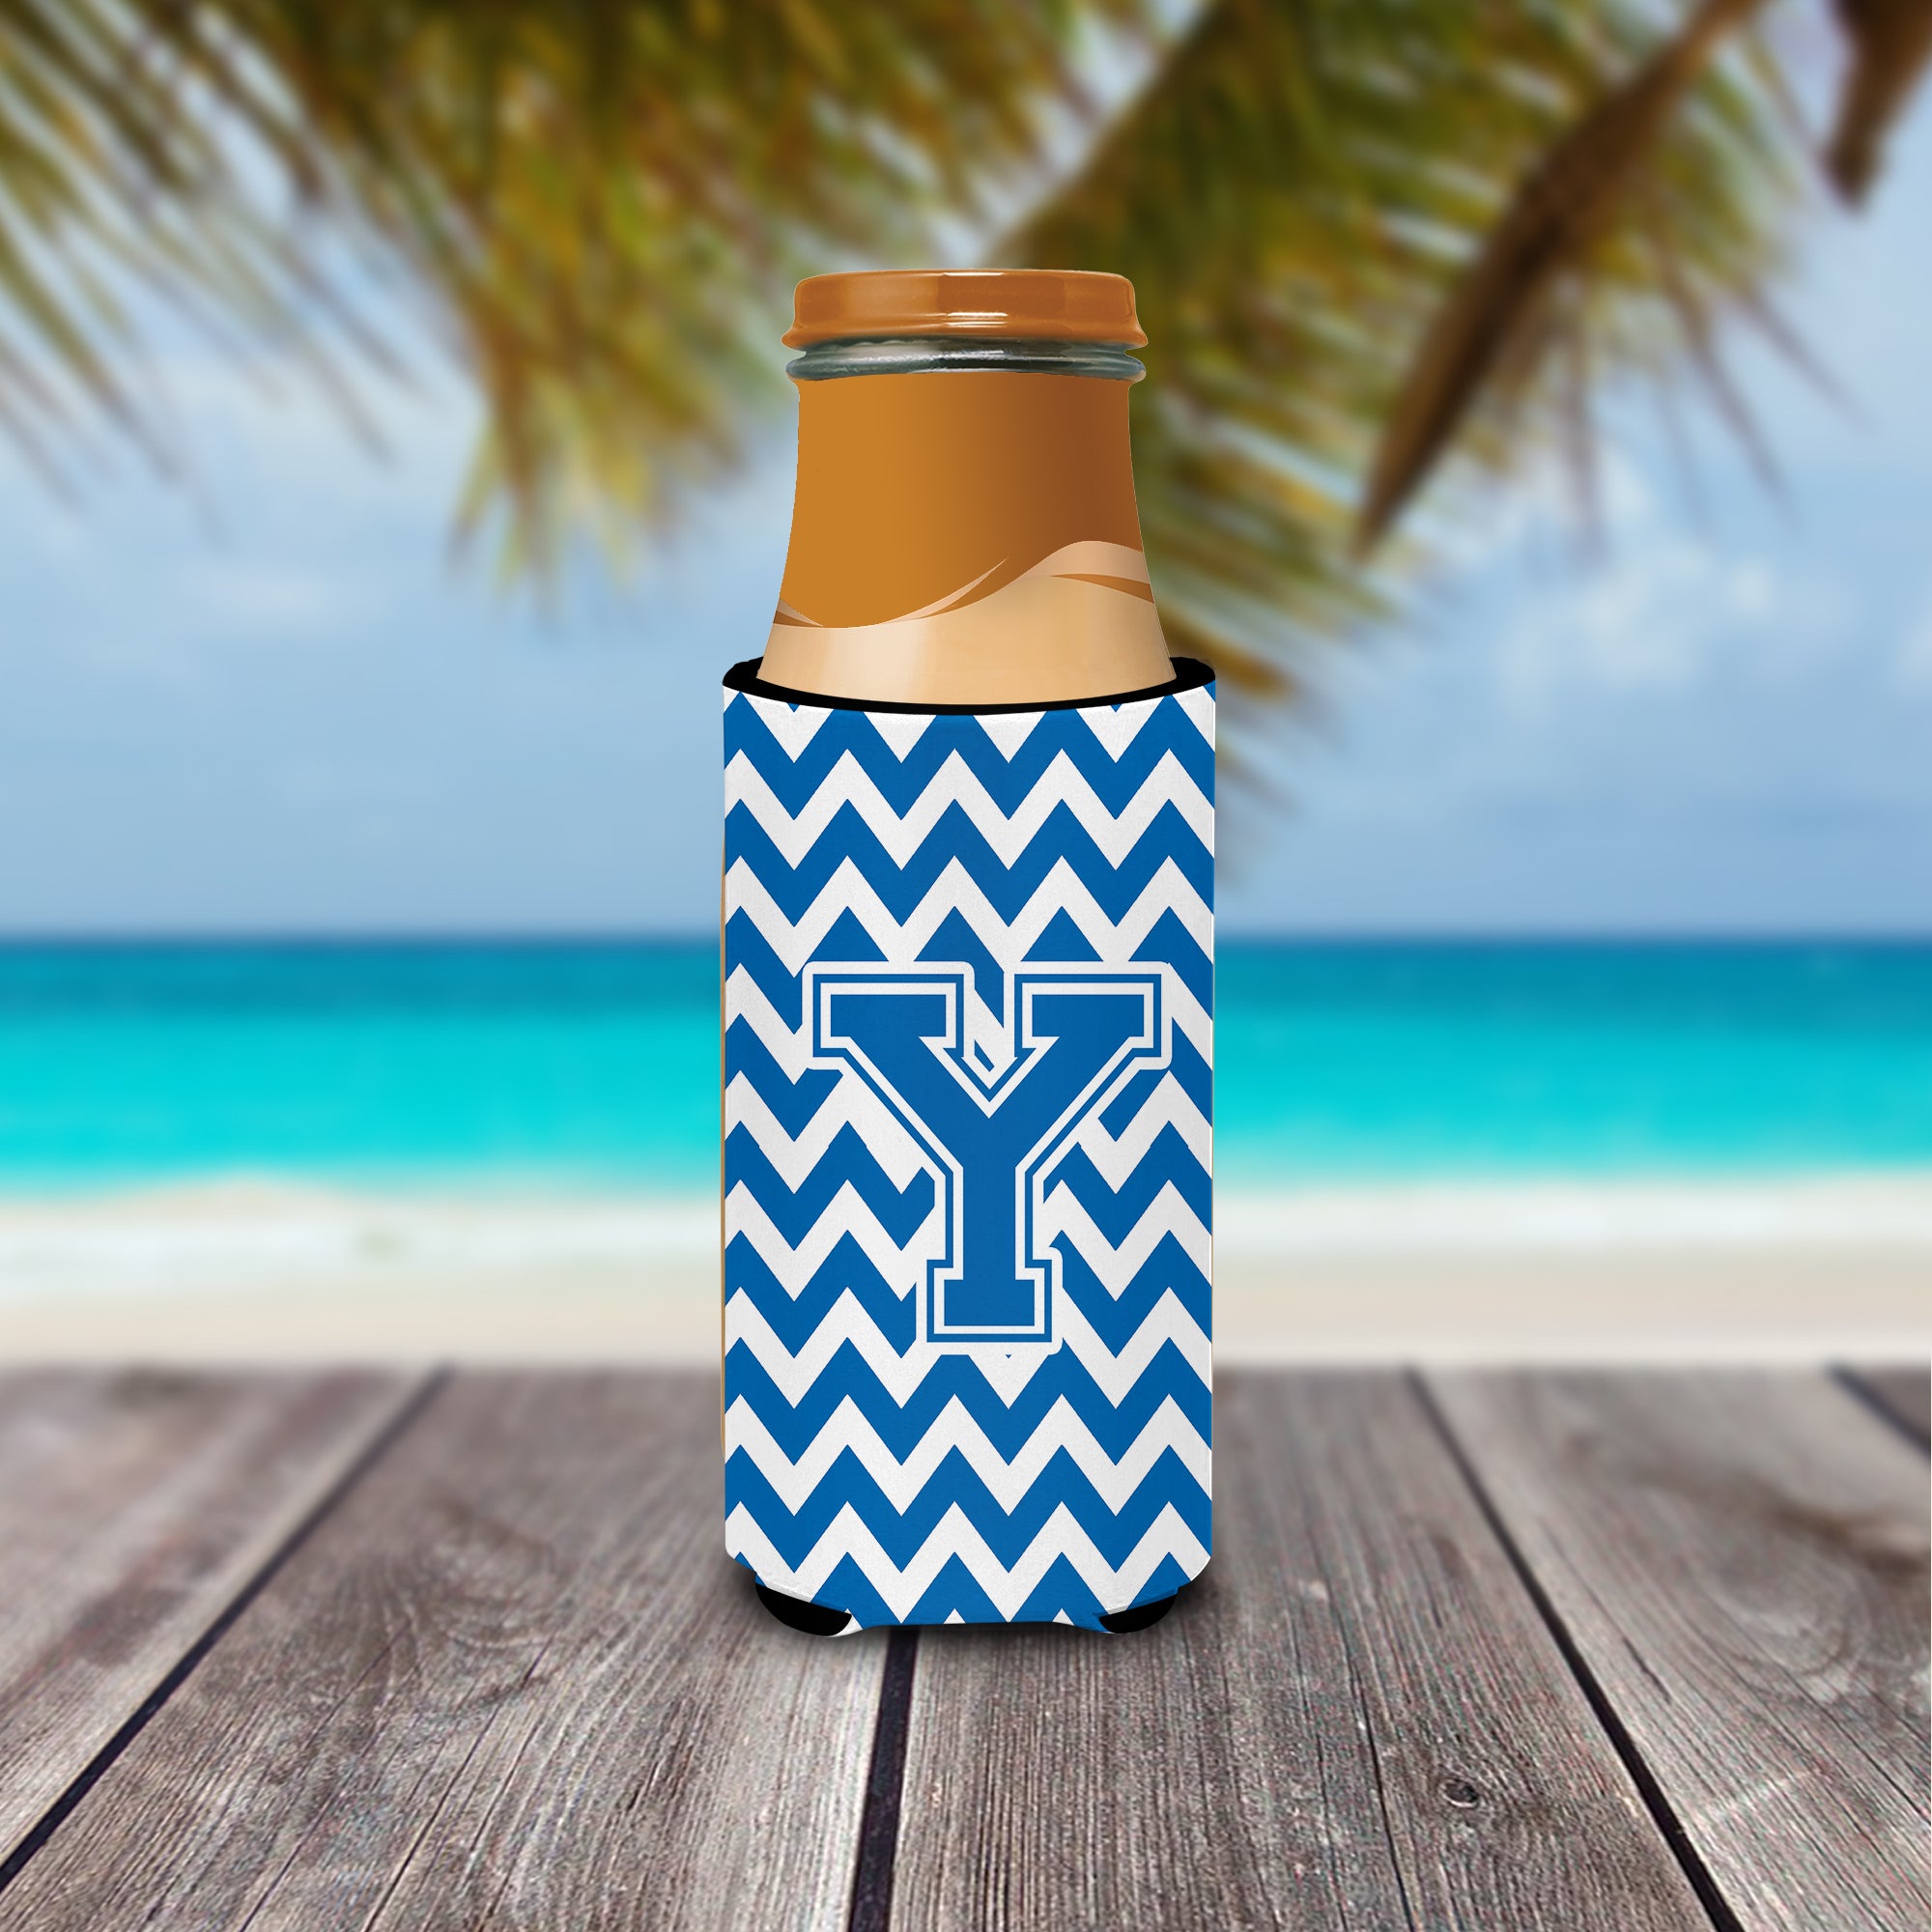 Letter Y Chevron Blue and White Ultra Beverage Insulators for slim cans CJ1056-YMUK.